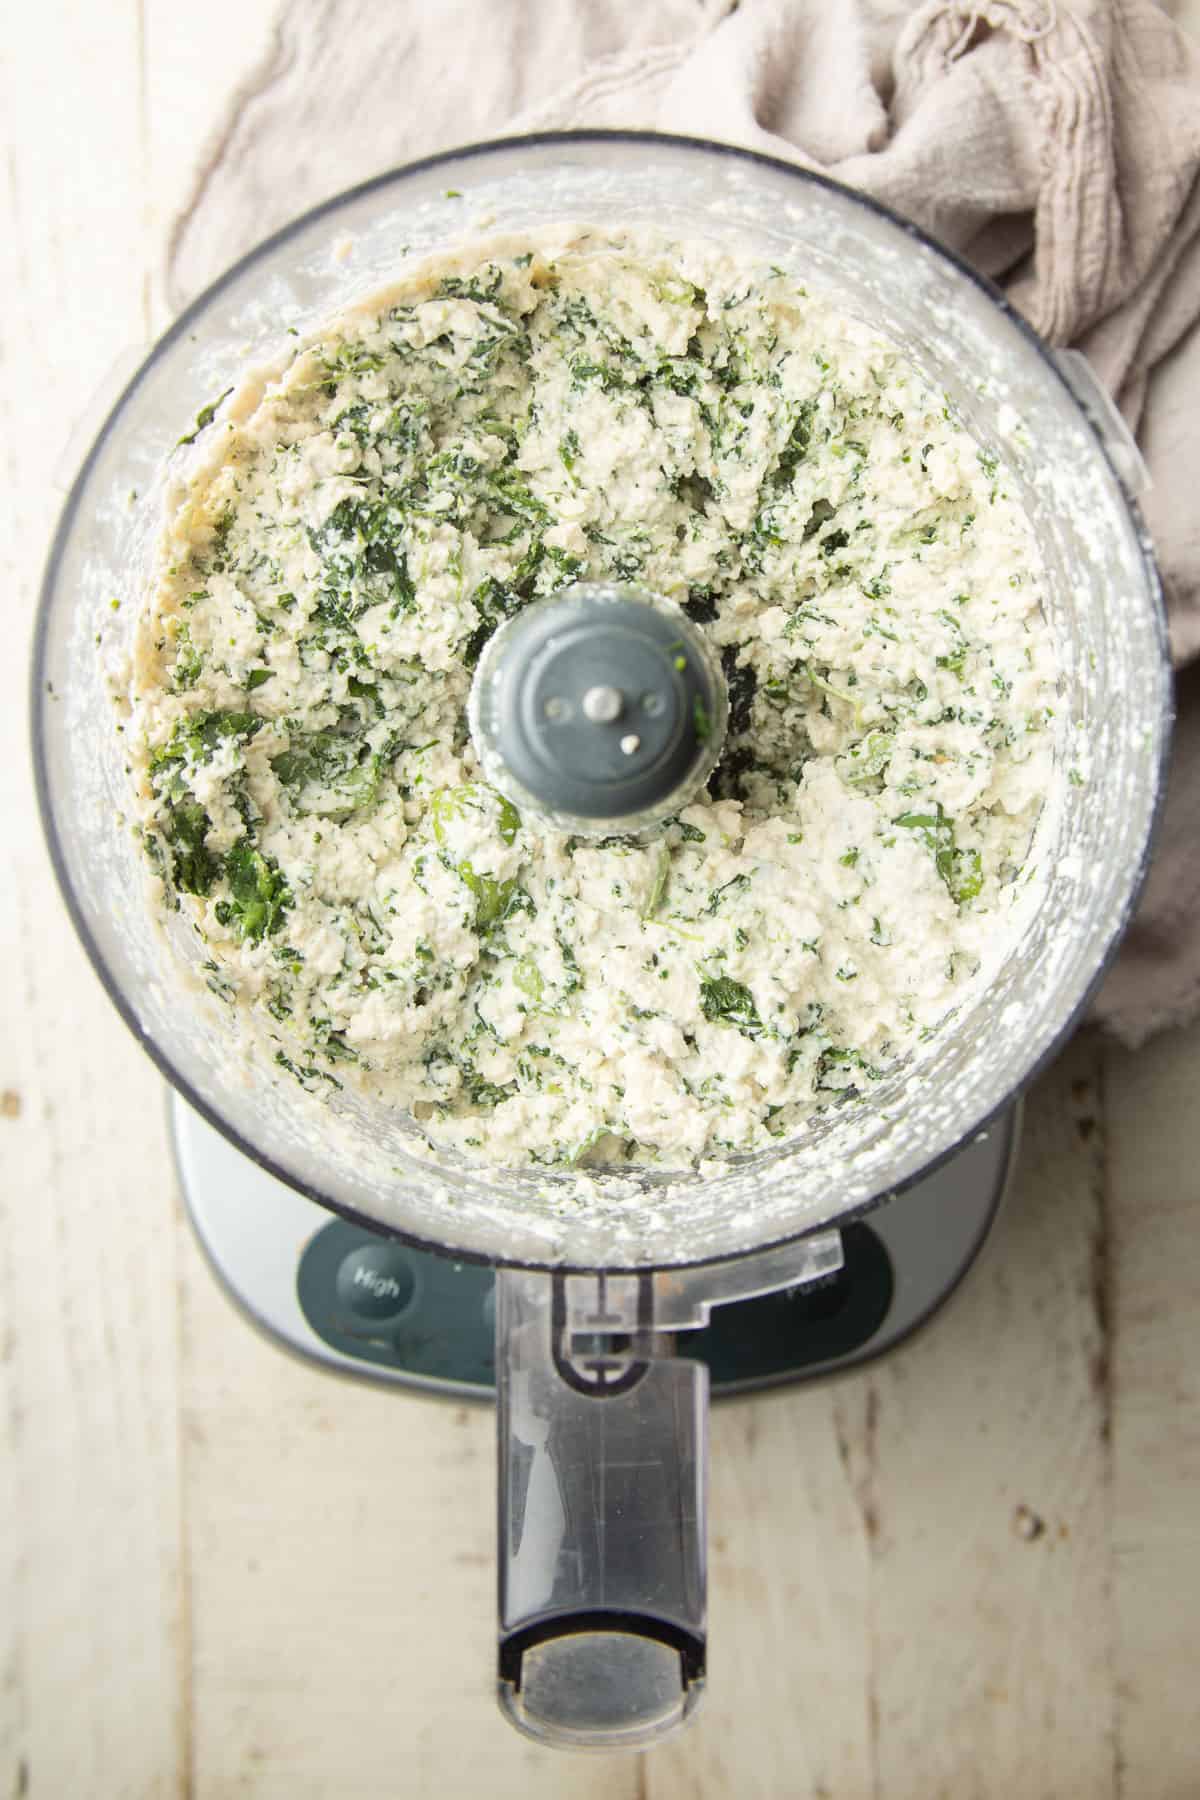 Vegan spinach ricotta in a food processor bowl, just after blending.